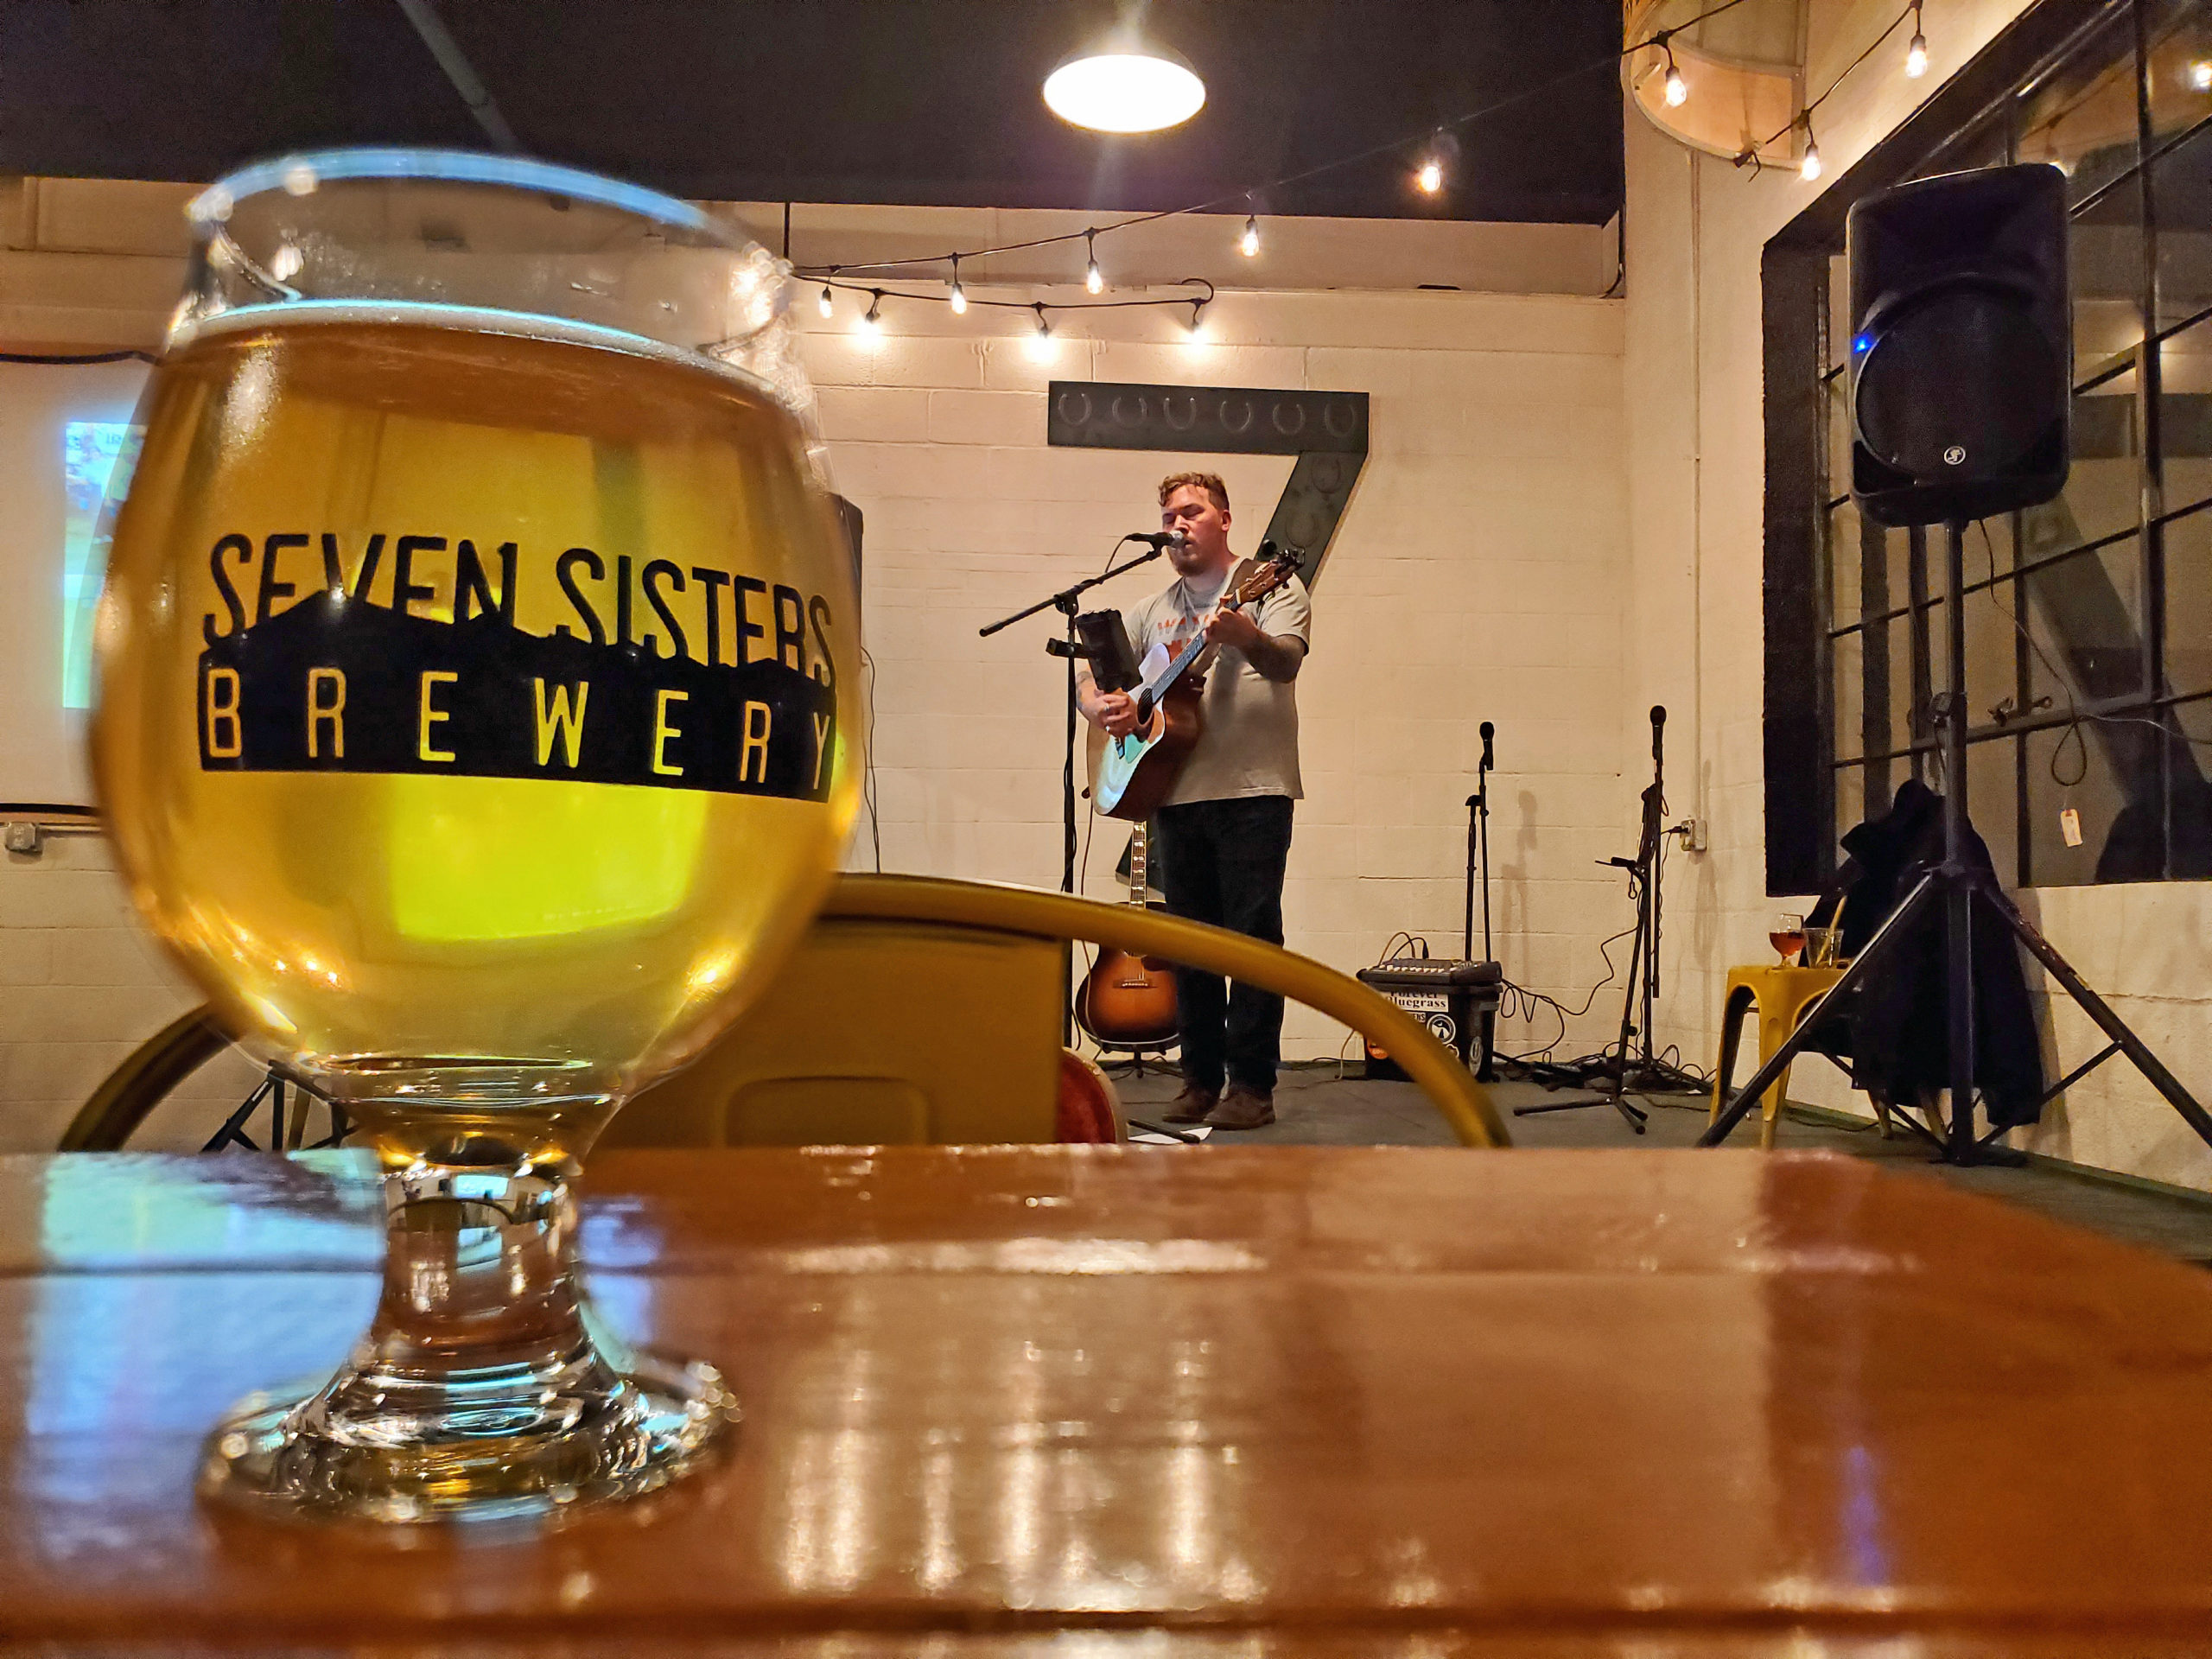 Sevensister's Brewery in Wytheville VA